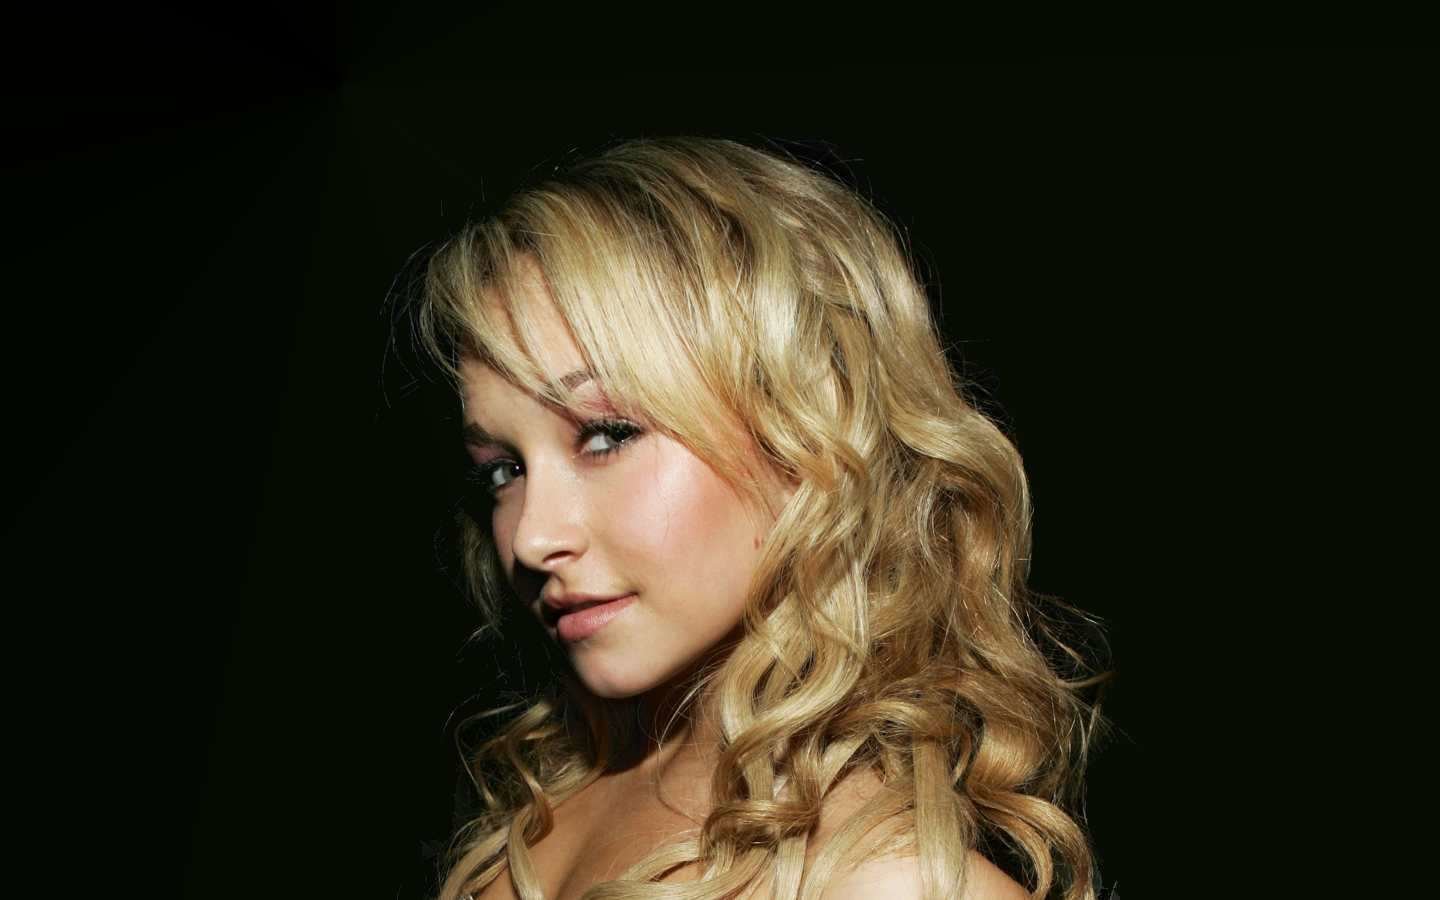 Free Hayden Panettiere high quality background ID:350439 for hd 1440x900 desktop